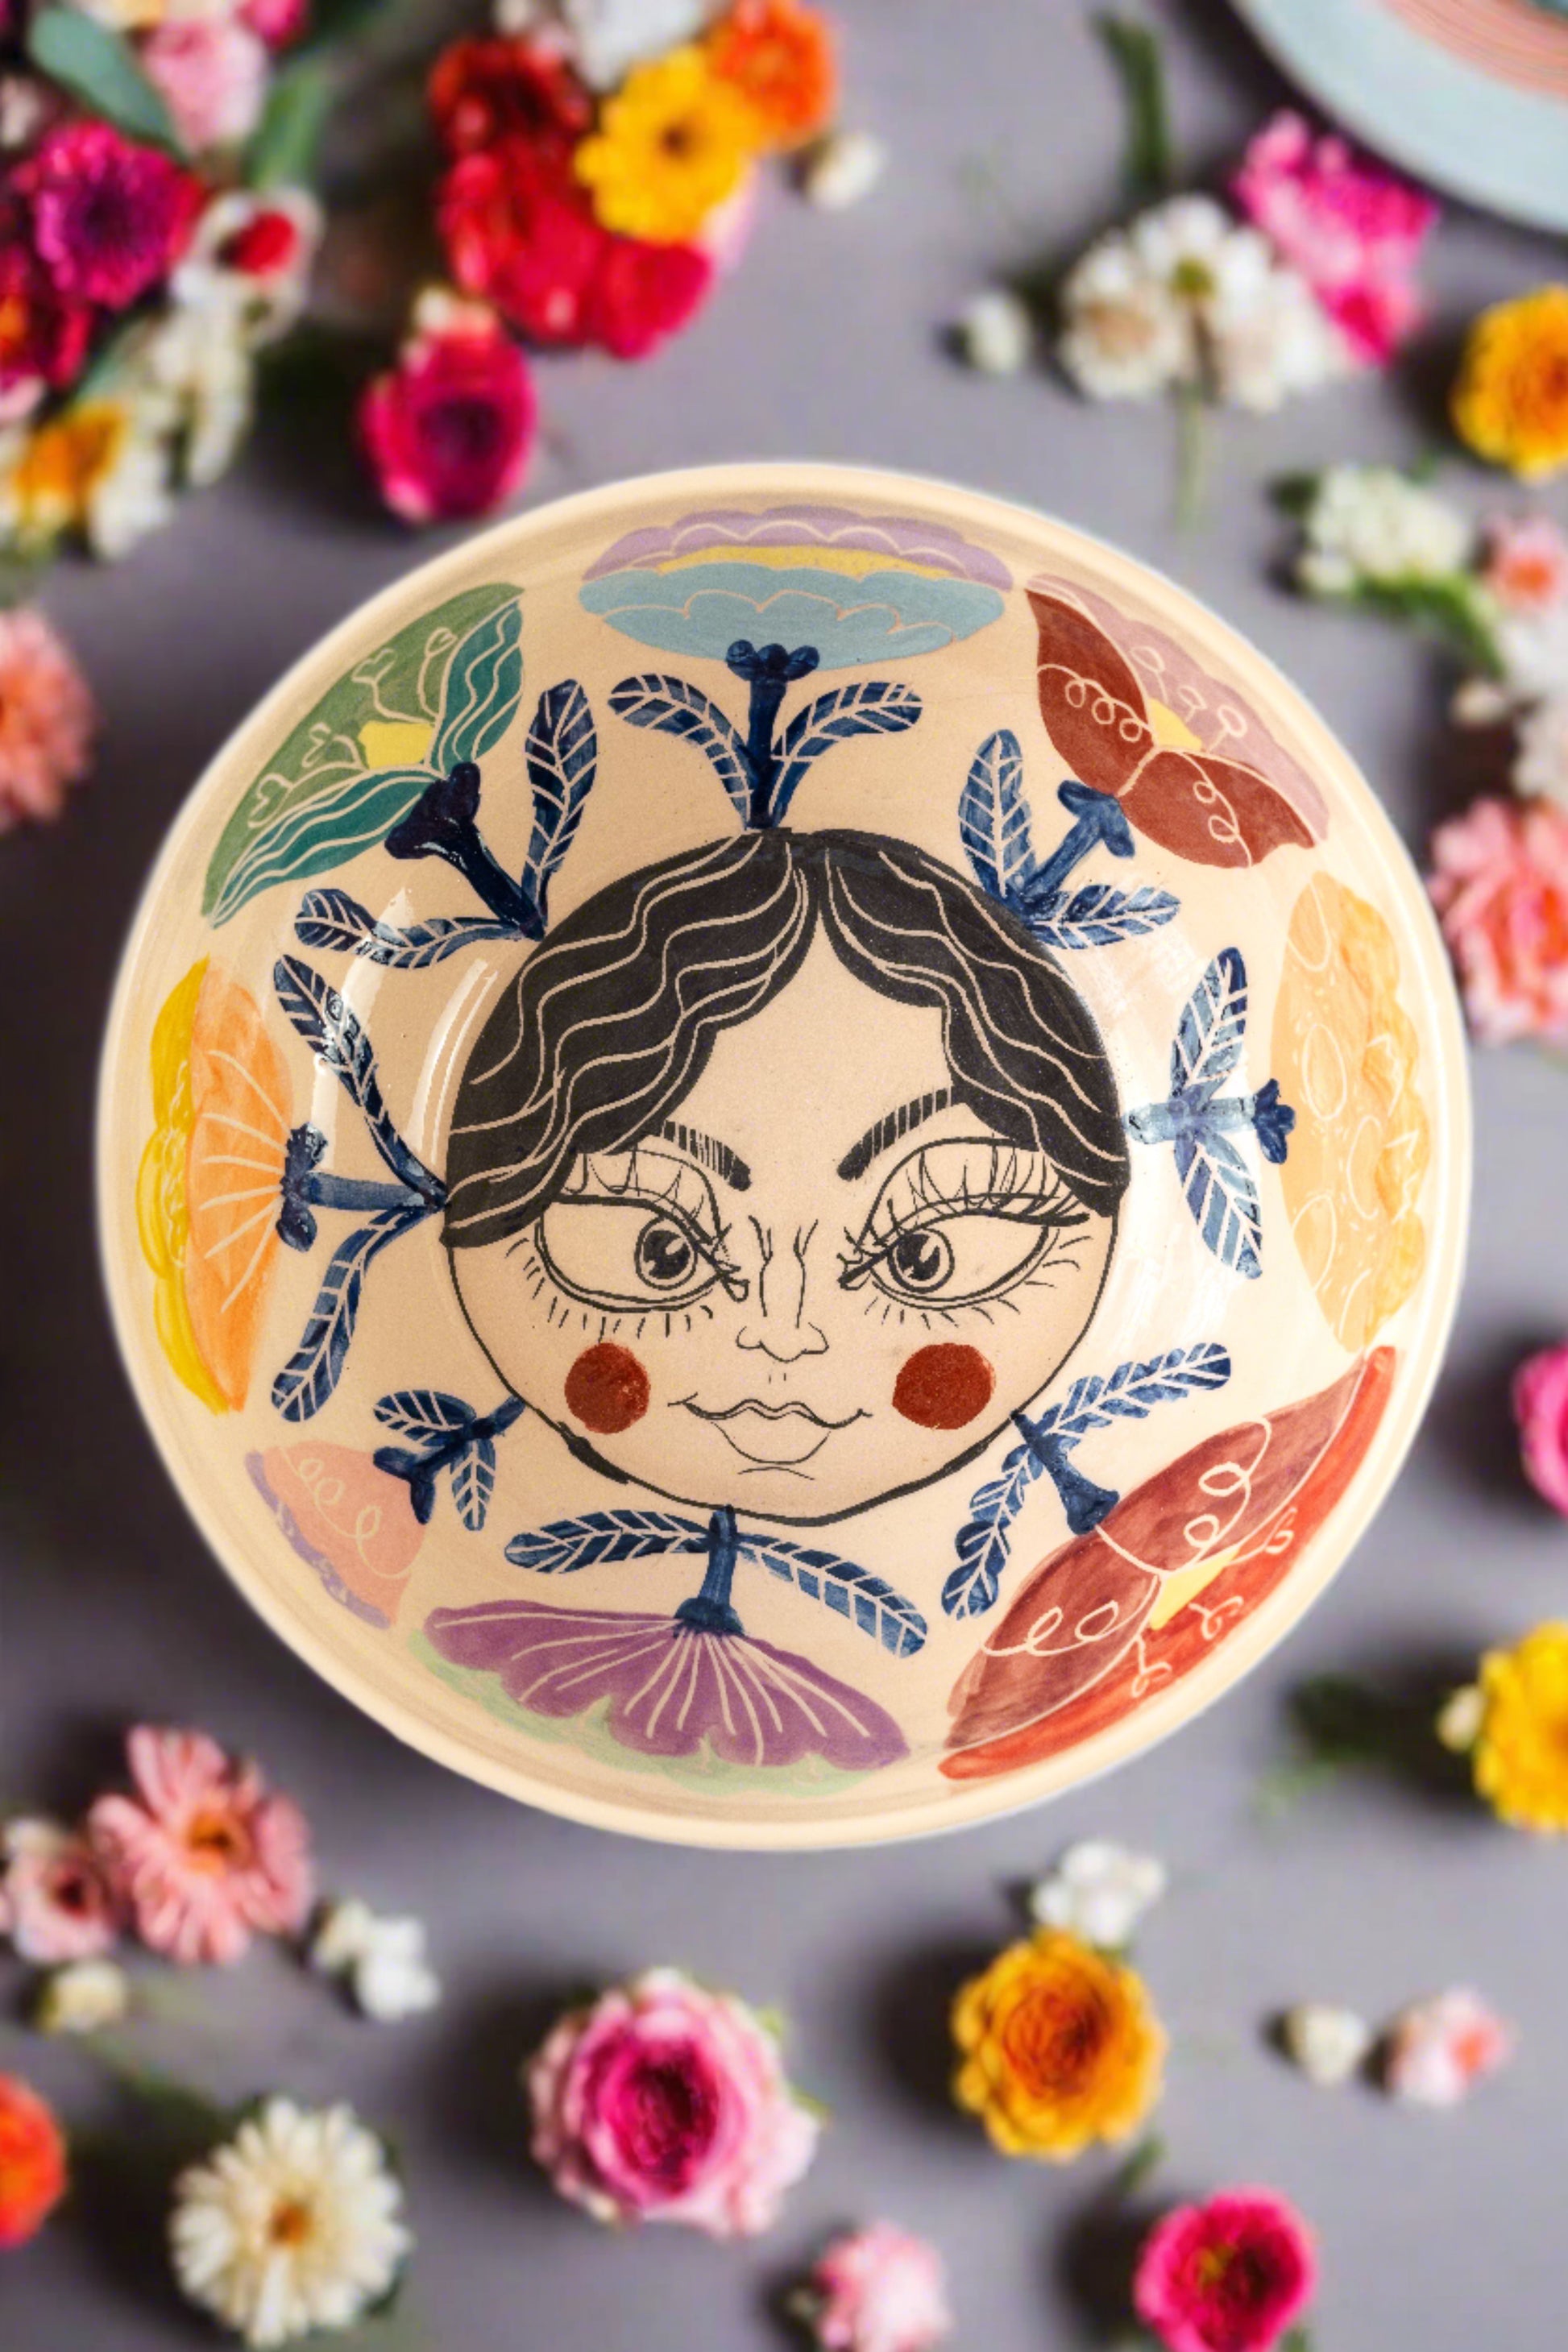 Handmade ceramic serving bowls fpor salads, with colorful flower details and a kind face design on the bottom of the bowl